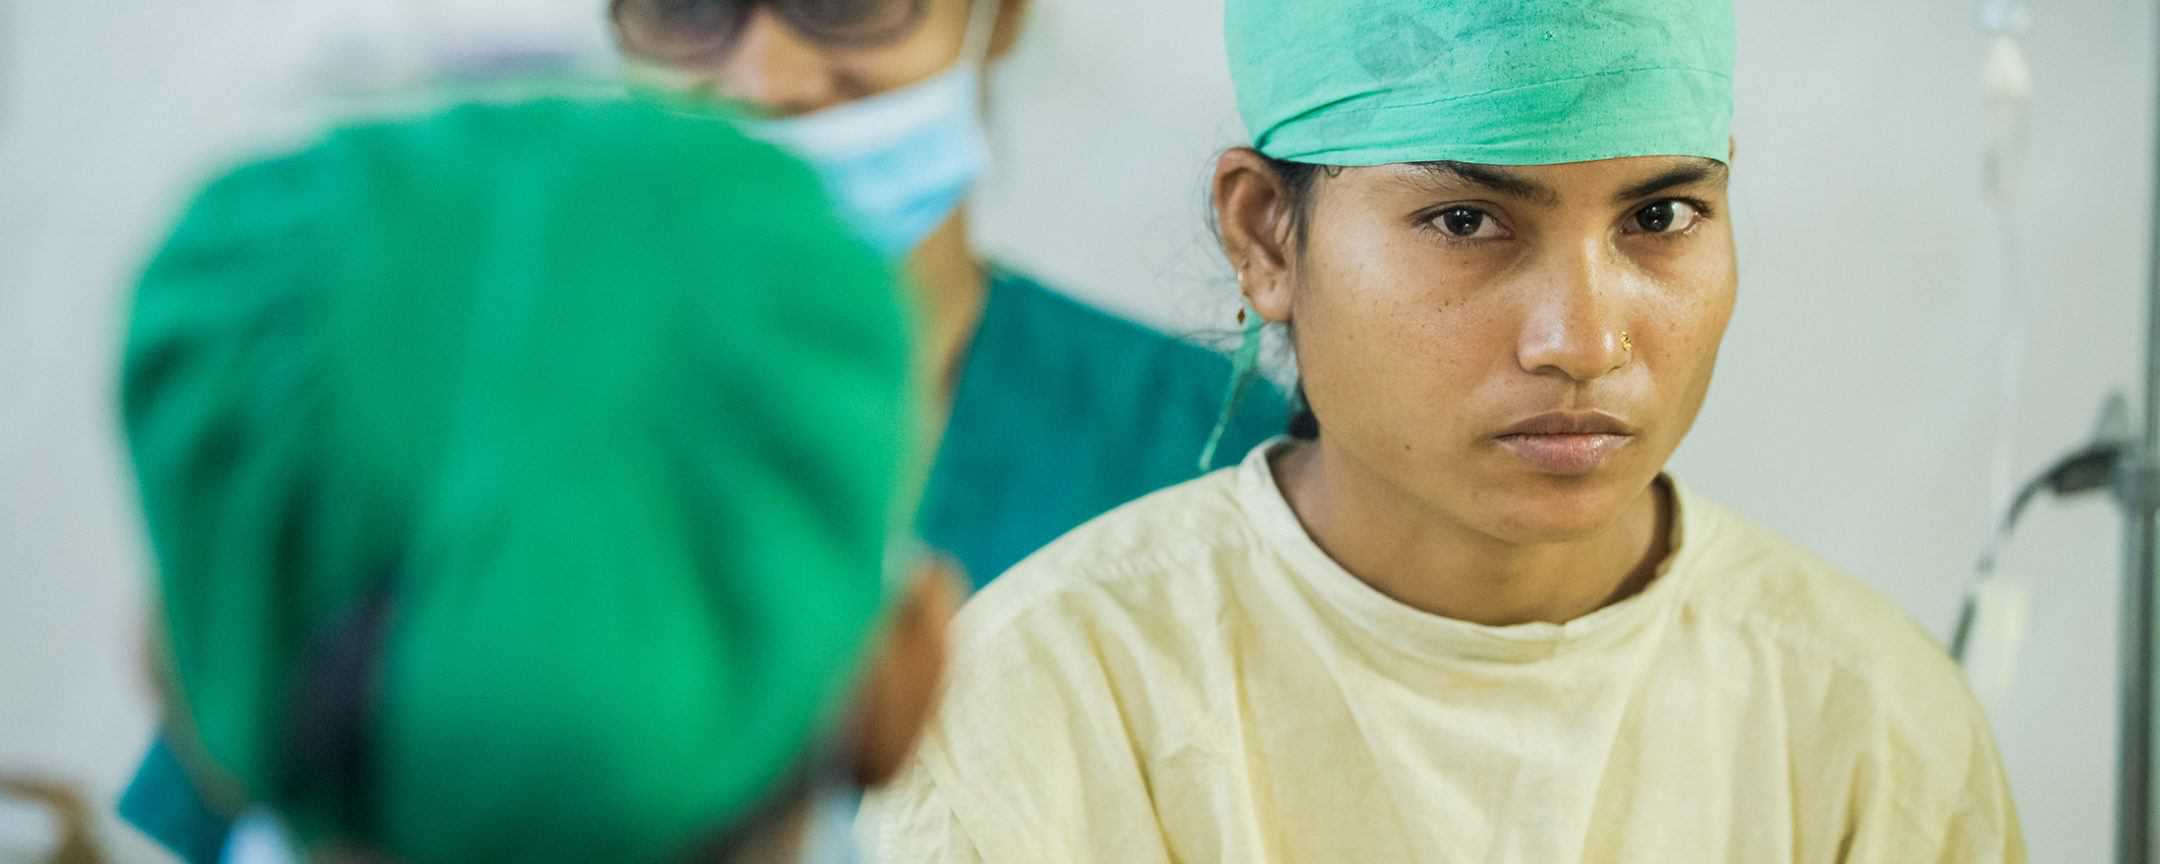 Fistula patient in OR in Bangladesh